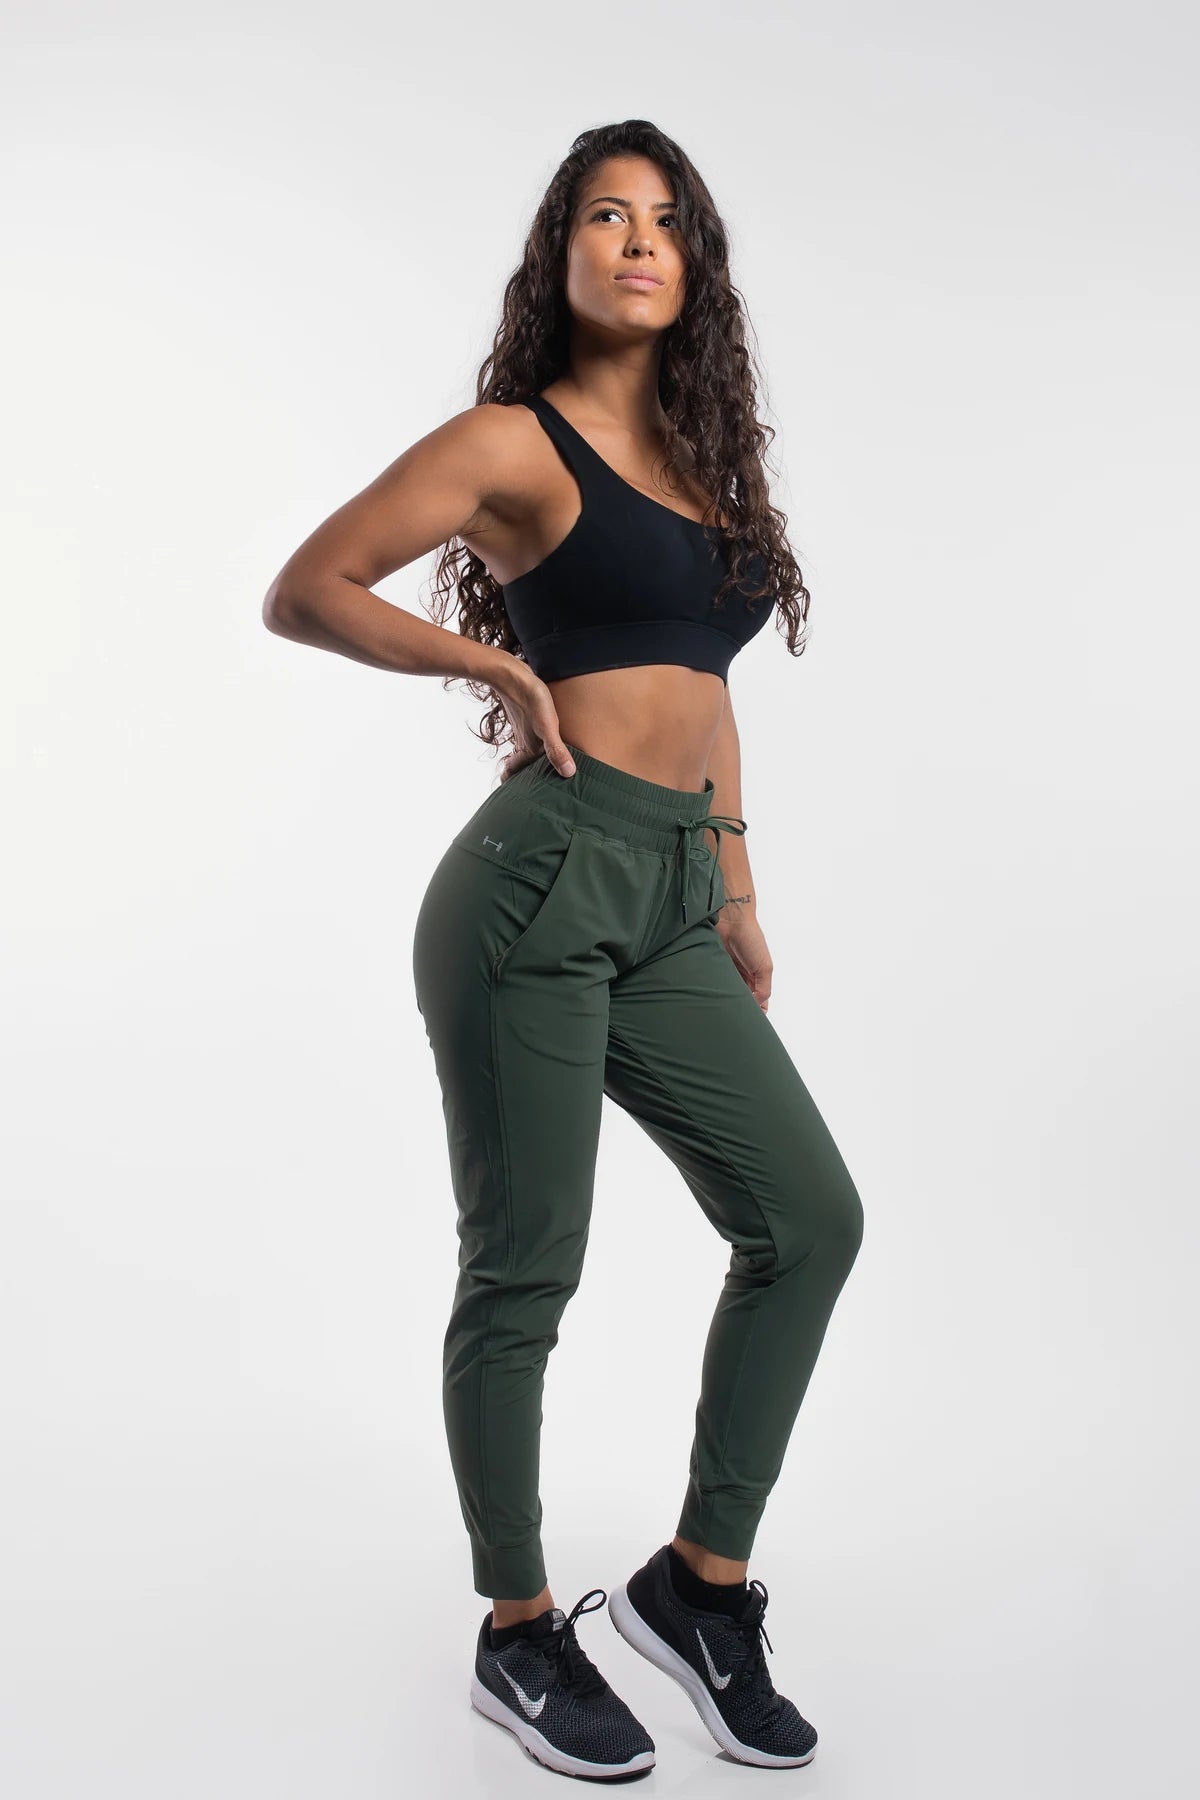 GetUSCart- THE GYM PEOPLE Women's Joggers Pants Lightweight